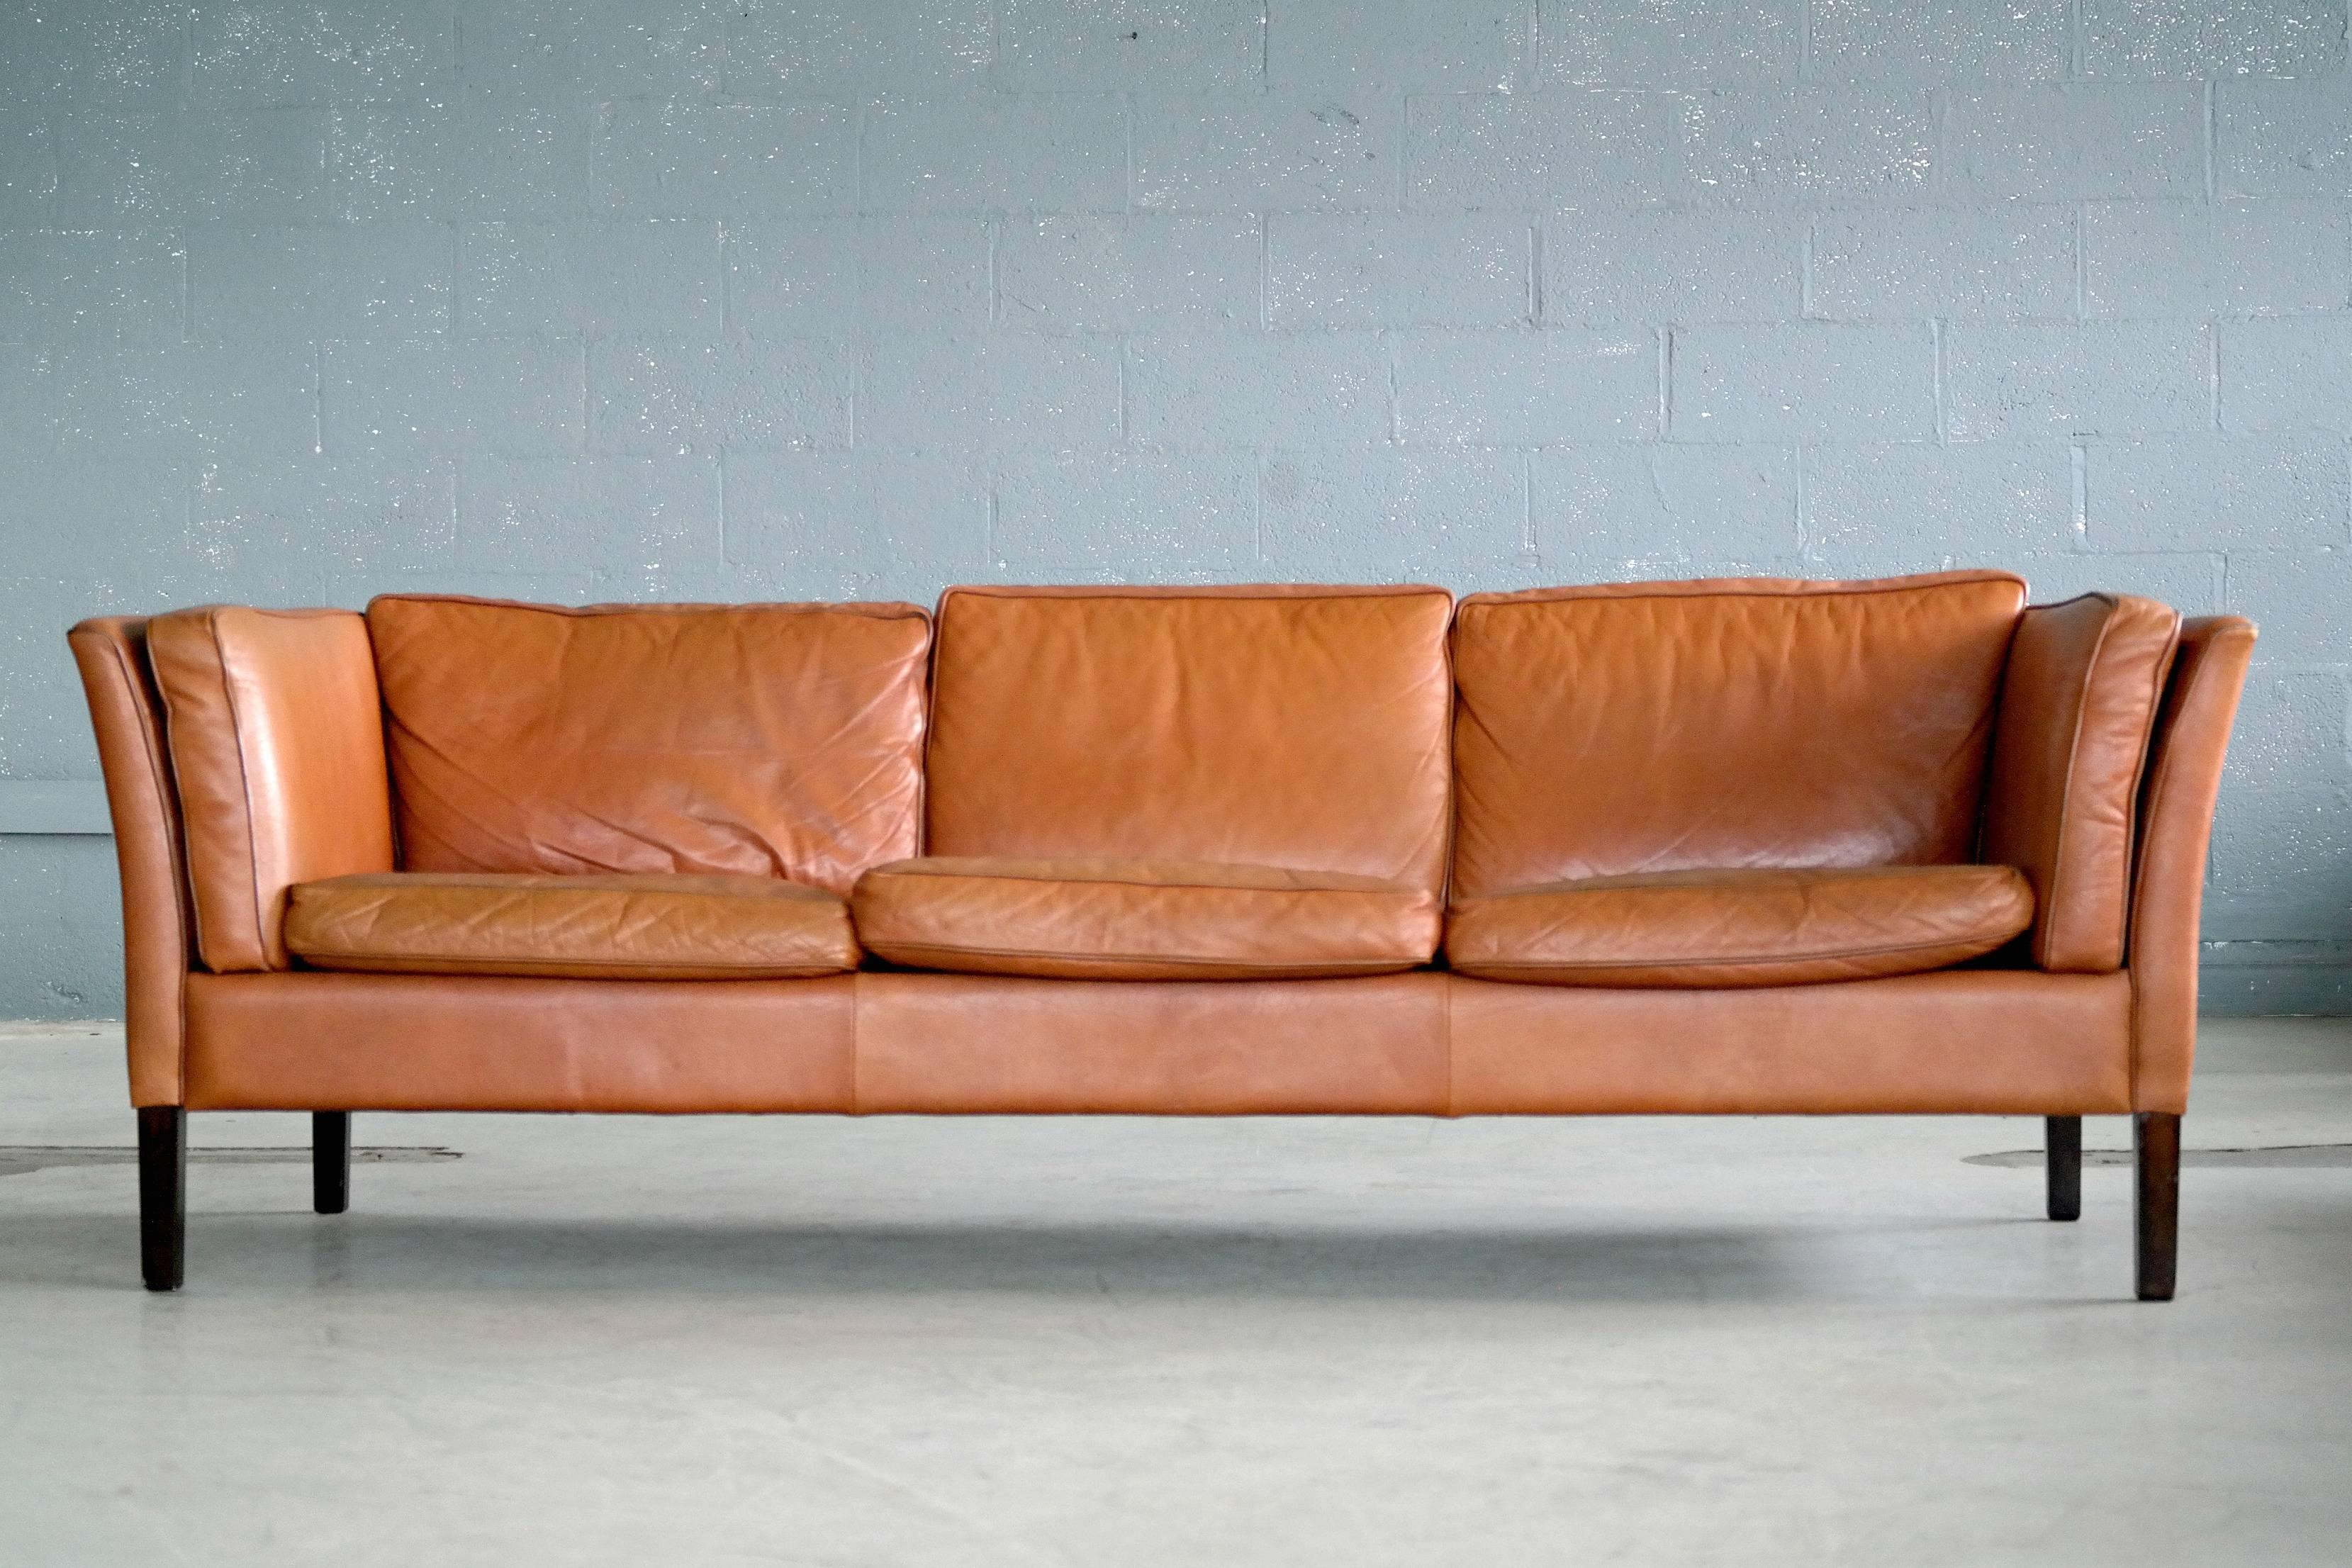 Stunning classic Børge Mogensen style three-seat sofa in supple soft patinated cognac colored leather raised on stained beech wood legs made by Stouby Mobler. Late 1960s design but probably manufactured in the 1970s. Very high build quality that